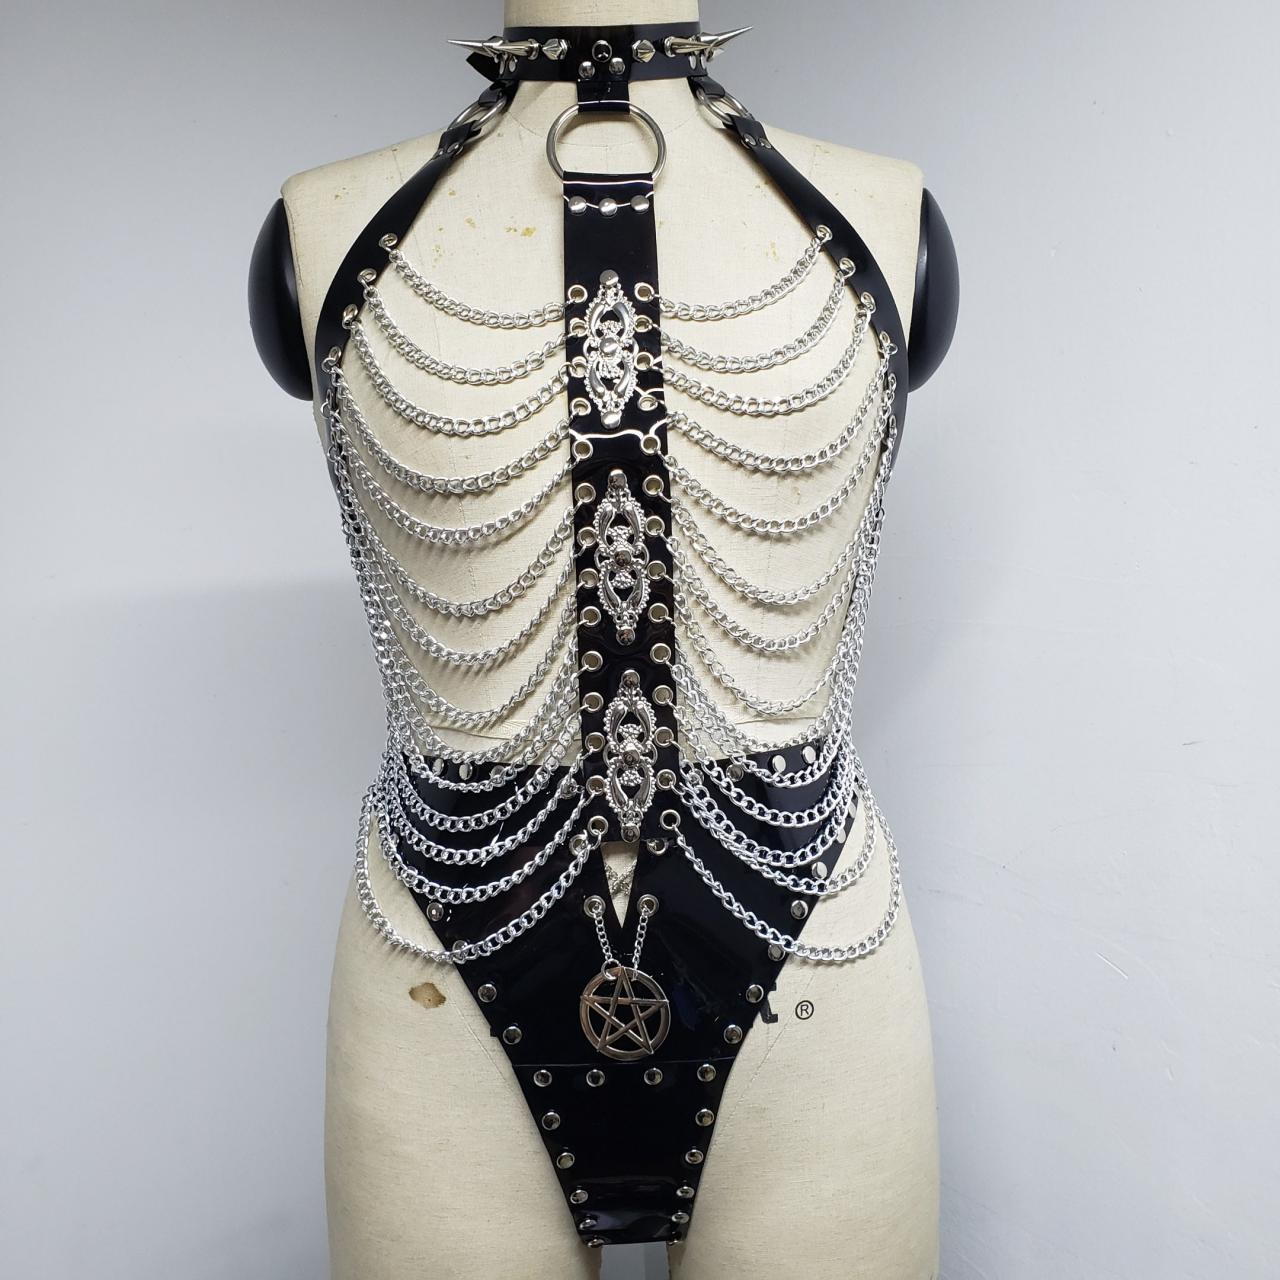 Chest harness with chains, PVC Harness With Spike Choker, Skeleton Harness,Bra Harnes With Chains, Gothic BDSM Fetish Harness ,PVC G-string